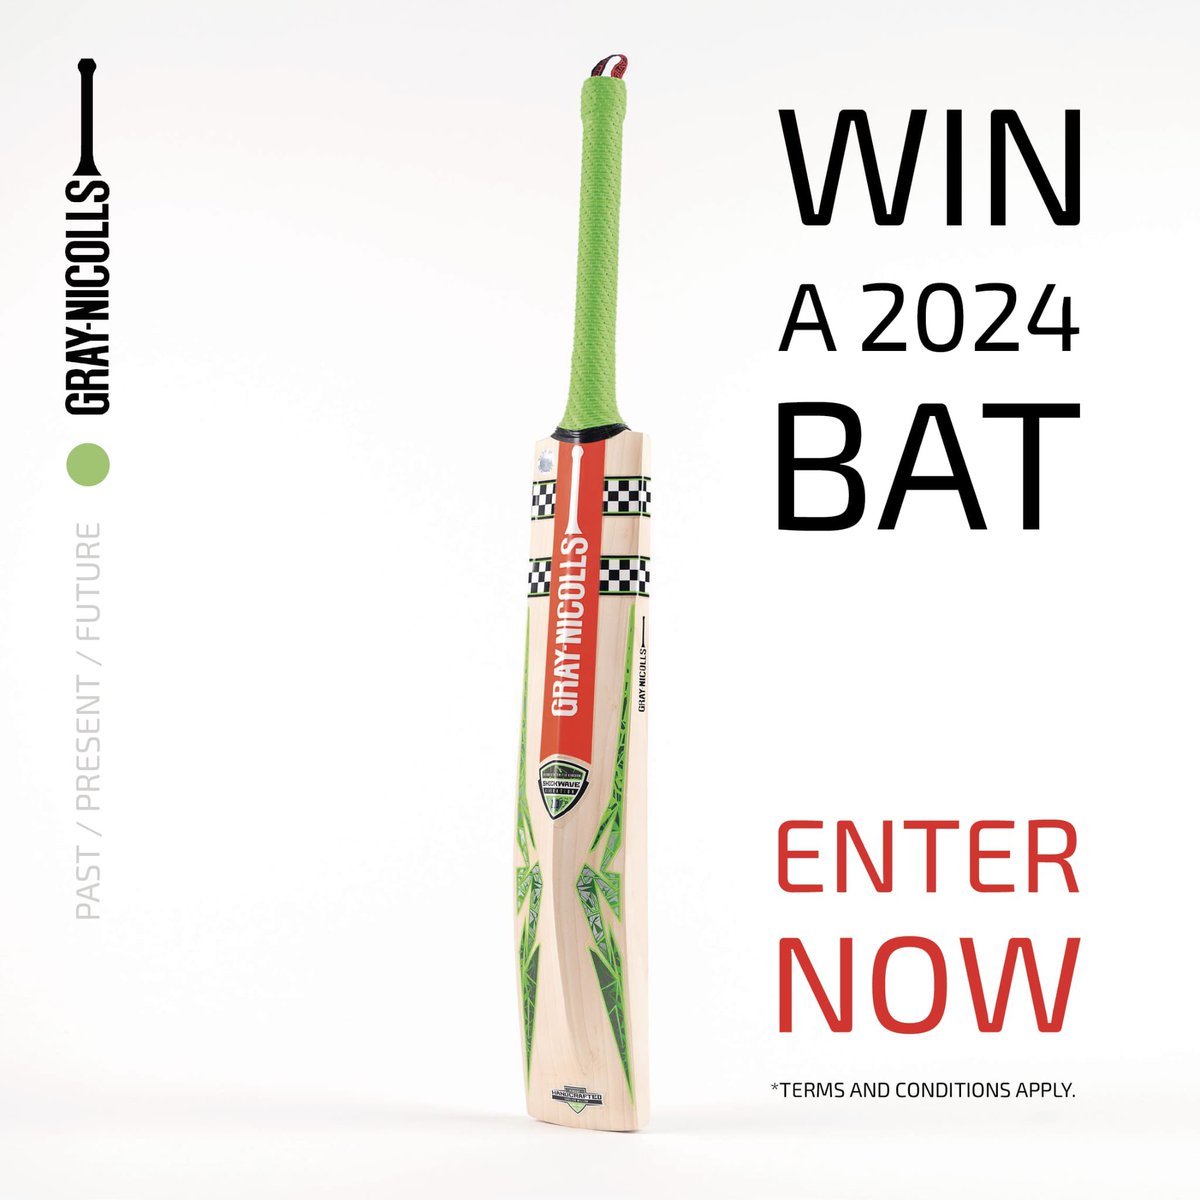 Be the first fan to win a bat from the new Gray-Nicolls range brnw.ch/GrayNics2024Co…